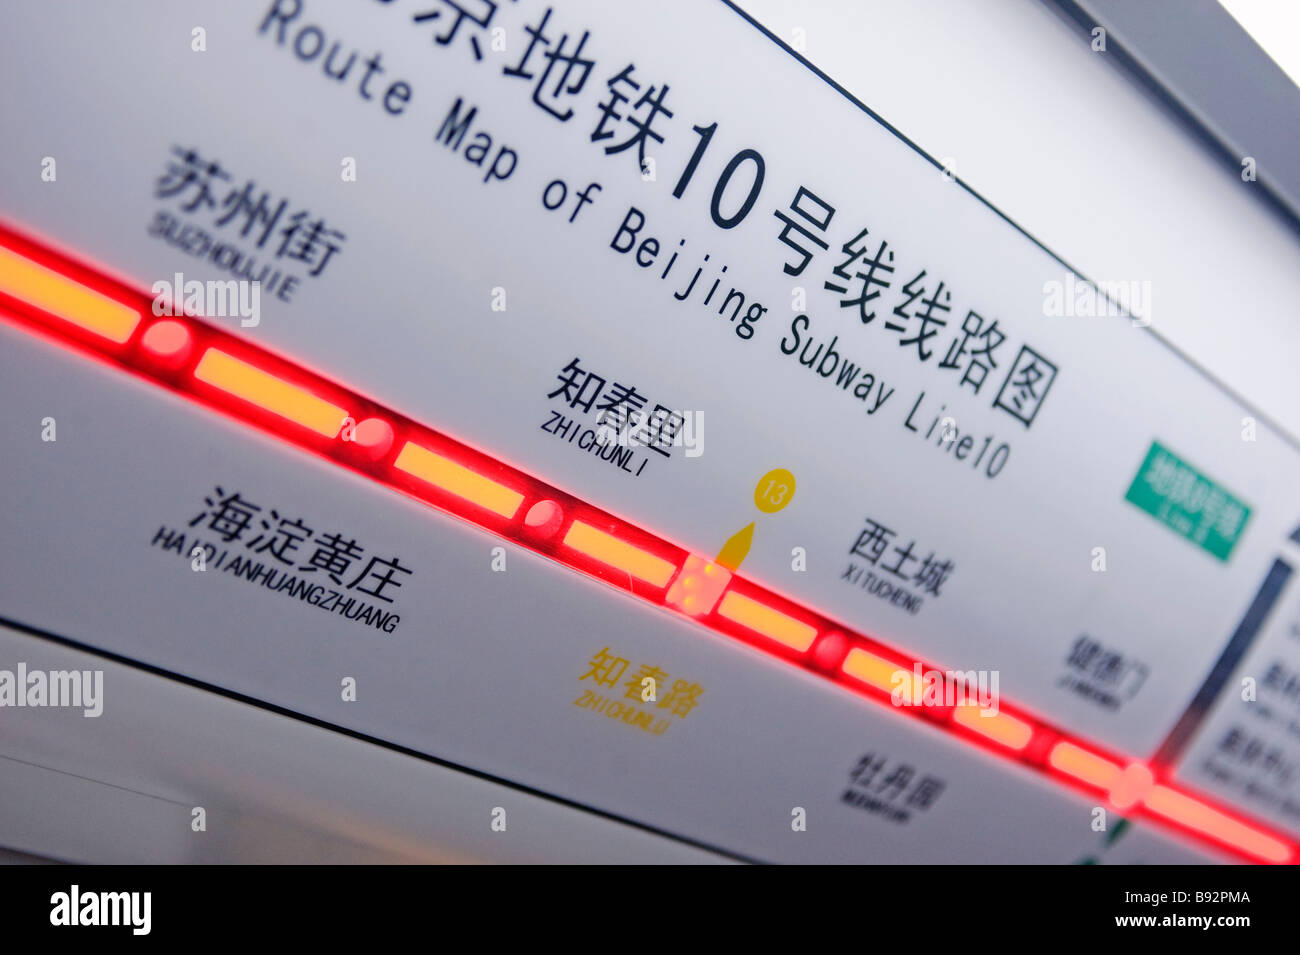 Detail of electronic route display in new subway train on Line 10 in Beijing Stock Photo